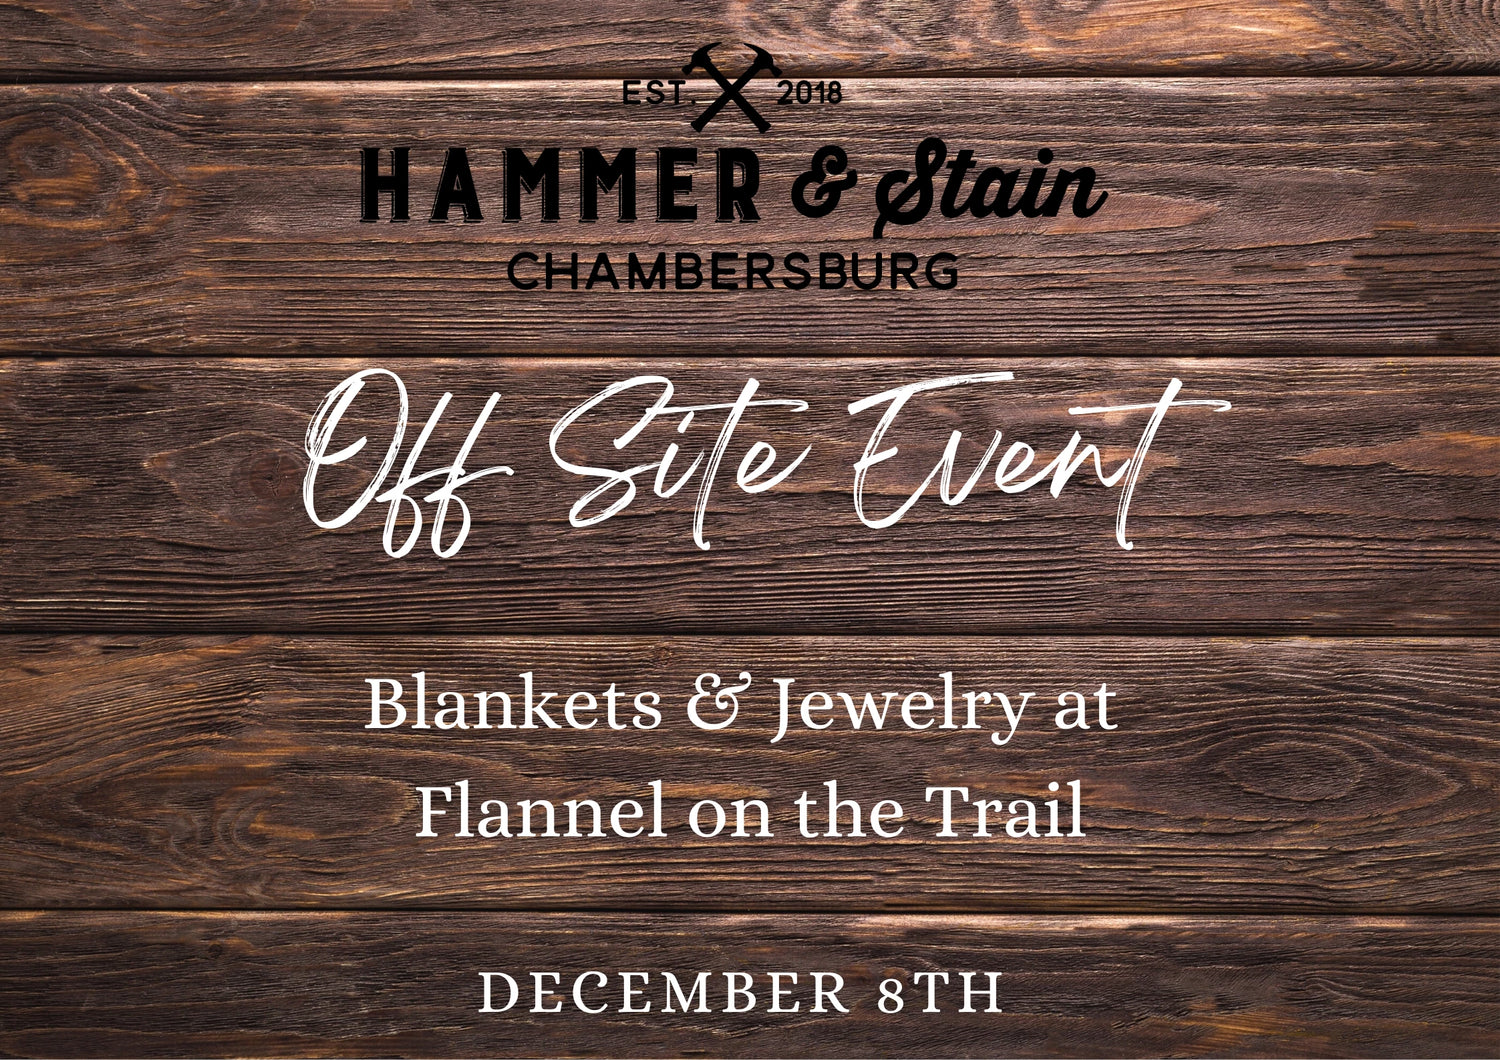 12/08/23 Cozy Hand Knit Blanket Workshop & Permanent Jewelry at Flannel on the Trail 6pm